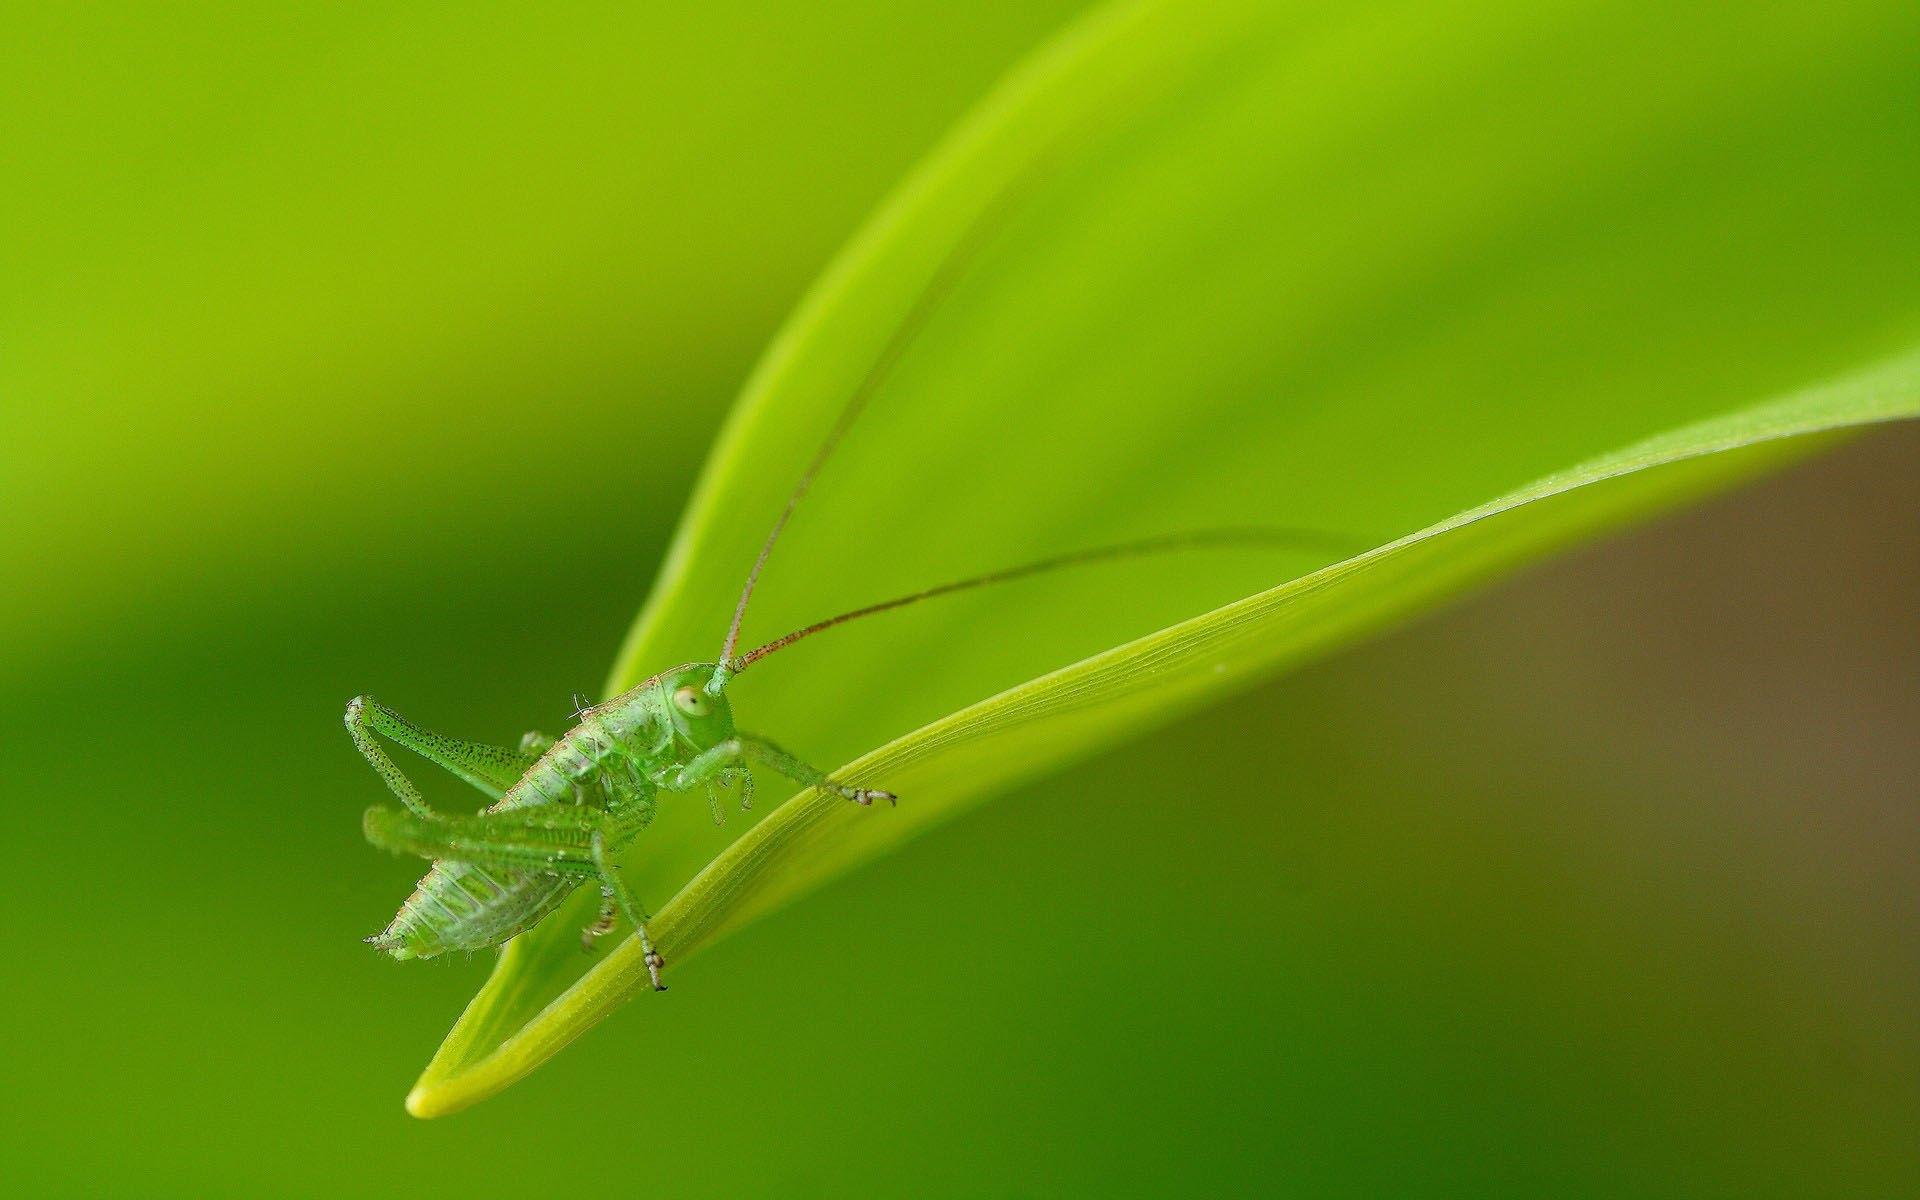 Free Images : green, produce, insect, bug, yellow, fauna, invertebrate, caterpillar, close up ...